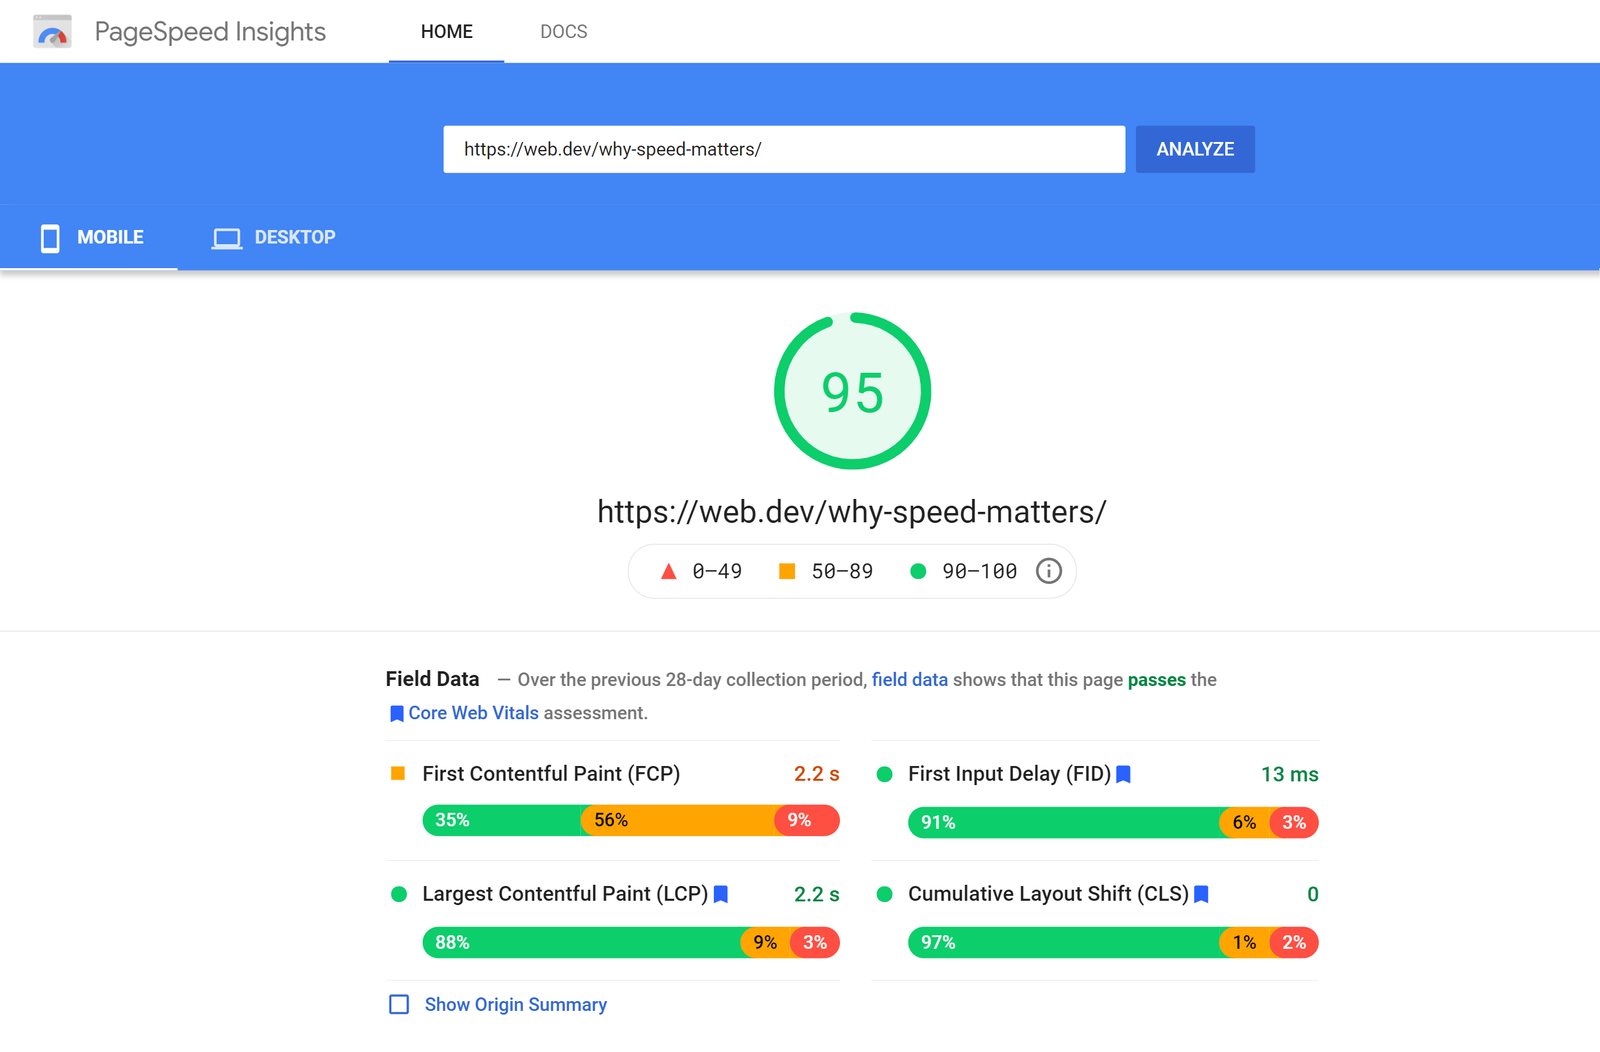 What is PageSpeed Insights?